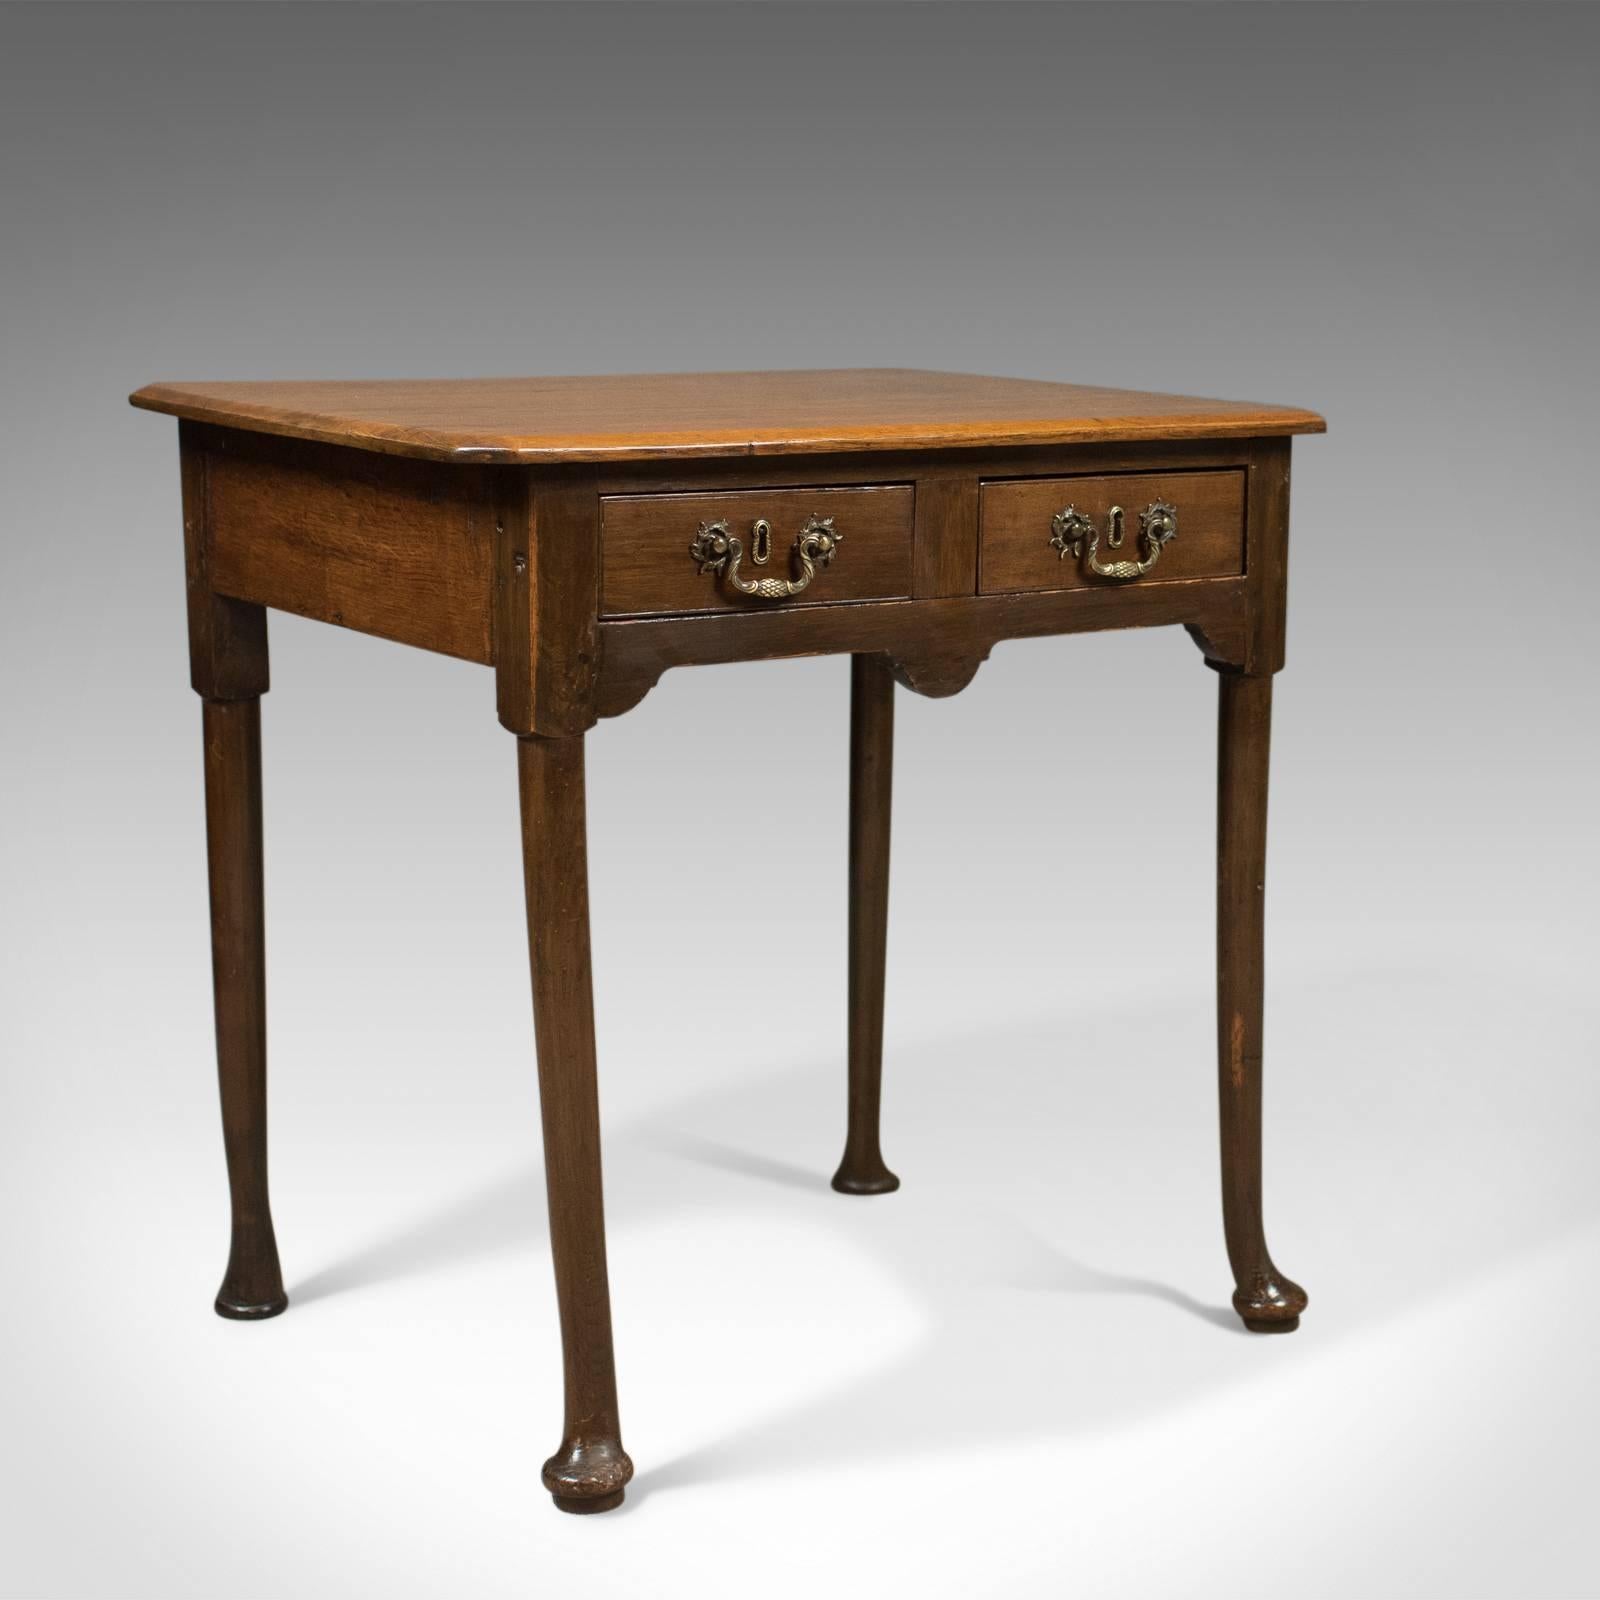 This is a charming, country, antique lowboy dating to the Victorian period, circa 1850.

In English oak with a waxed finish and desirable aged patina
Three plank top displaying good grain interest and wisps of medullary rays
Canted corners and a